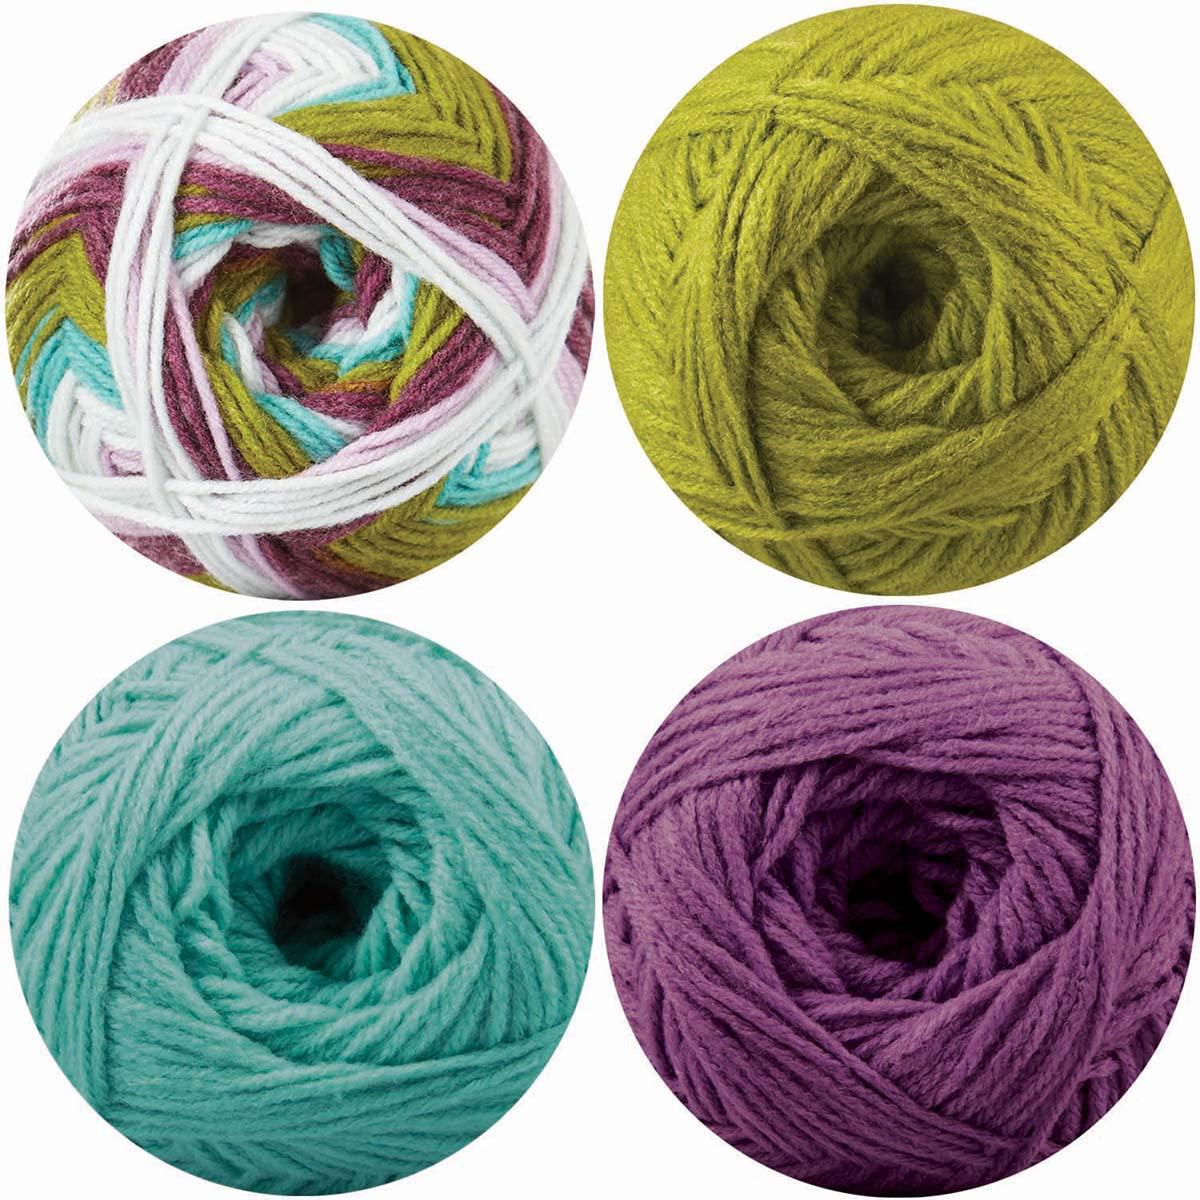 Herrschners worsted 8 stripes yarn pack